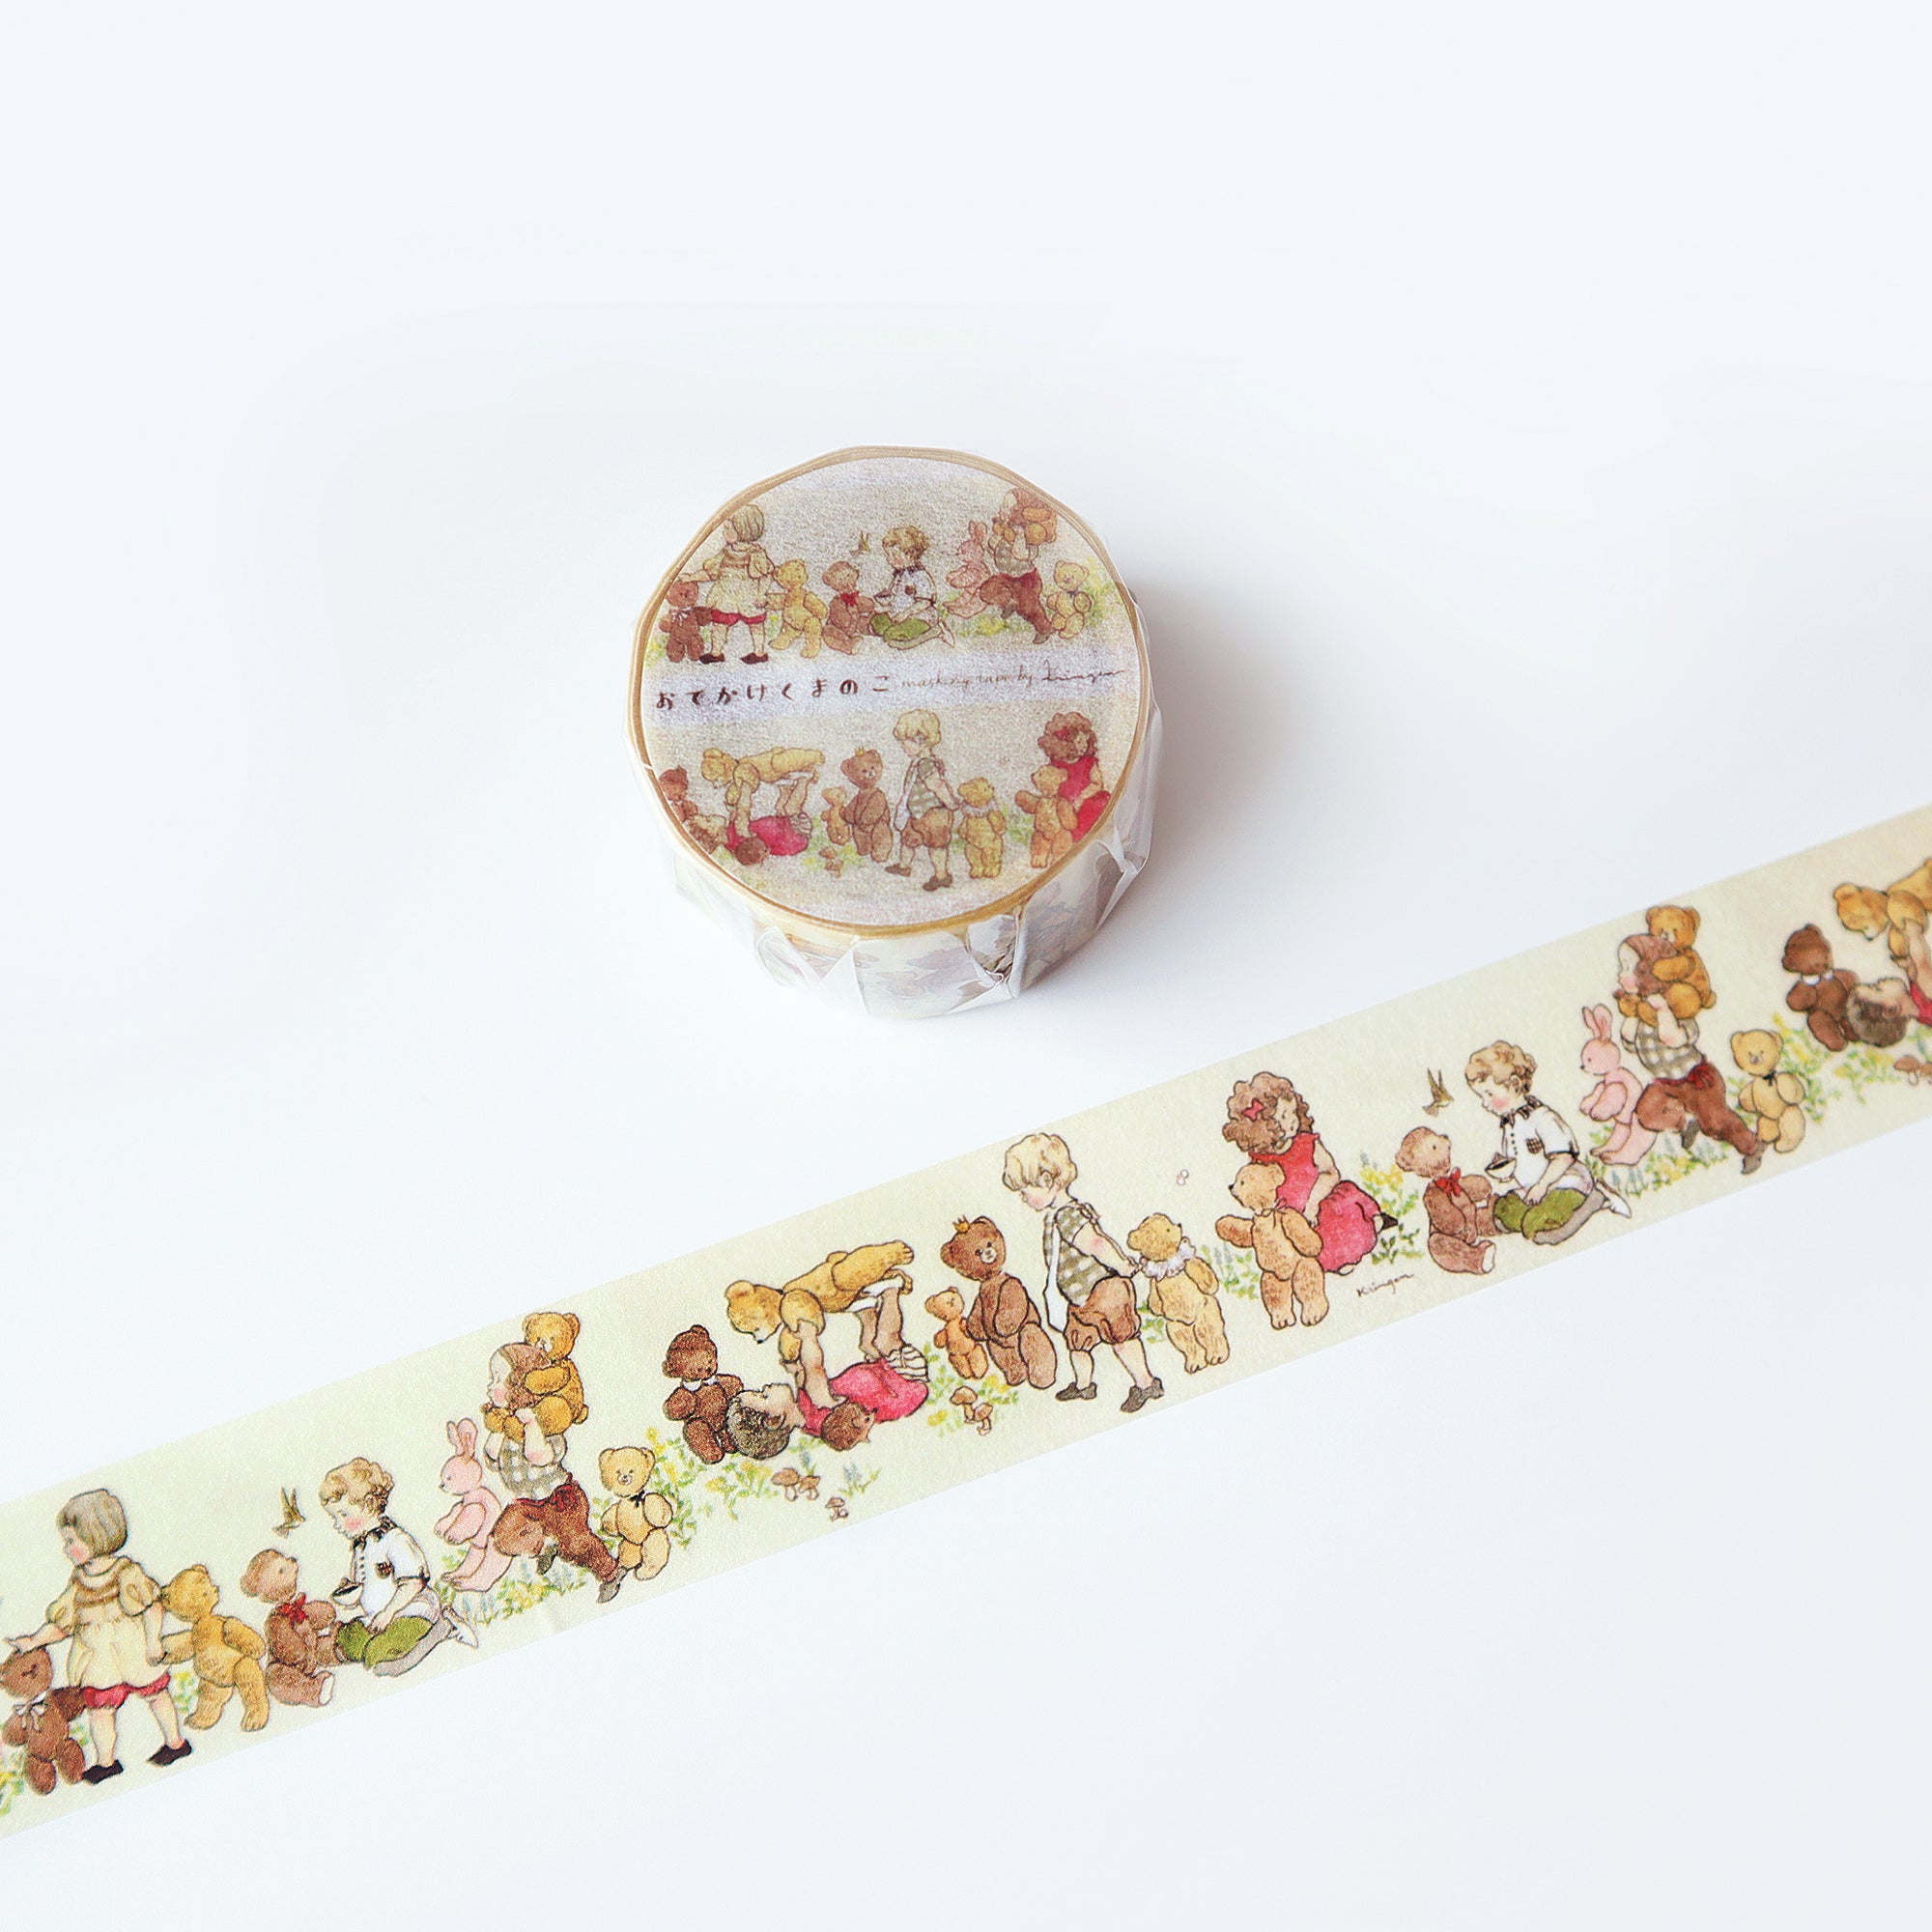 Krimgen Washi Tape: Going Out with Teddy Bears